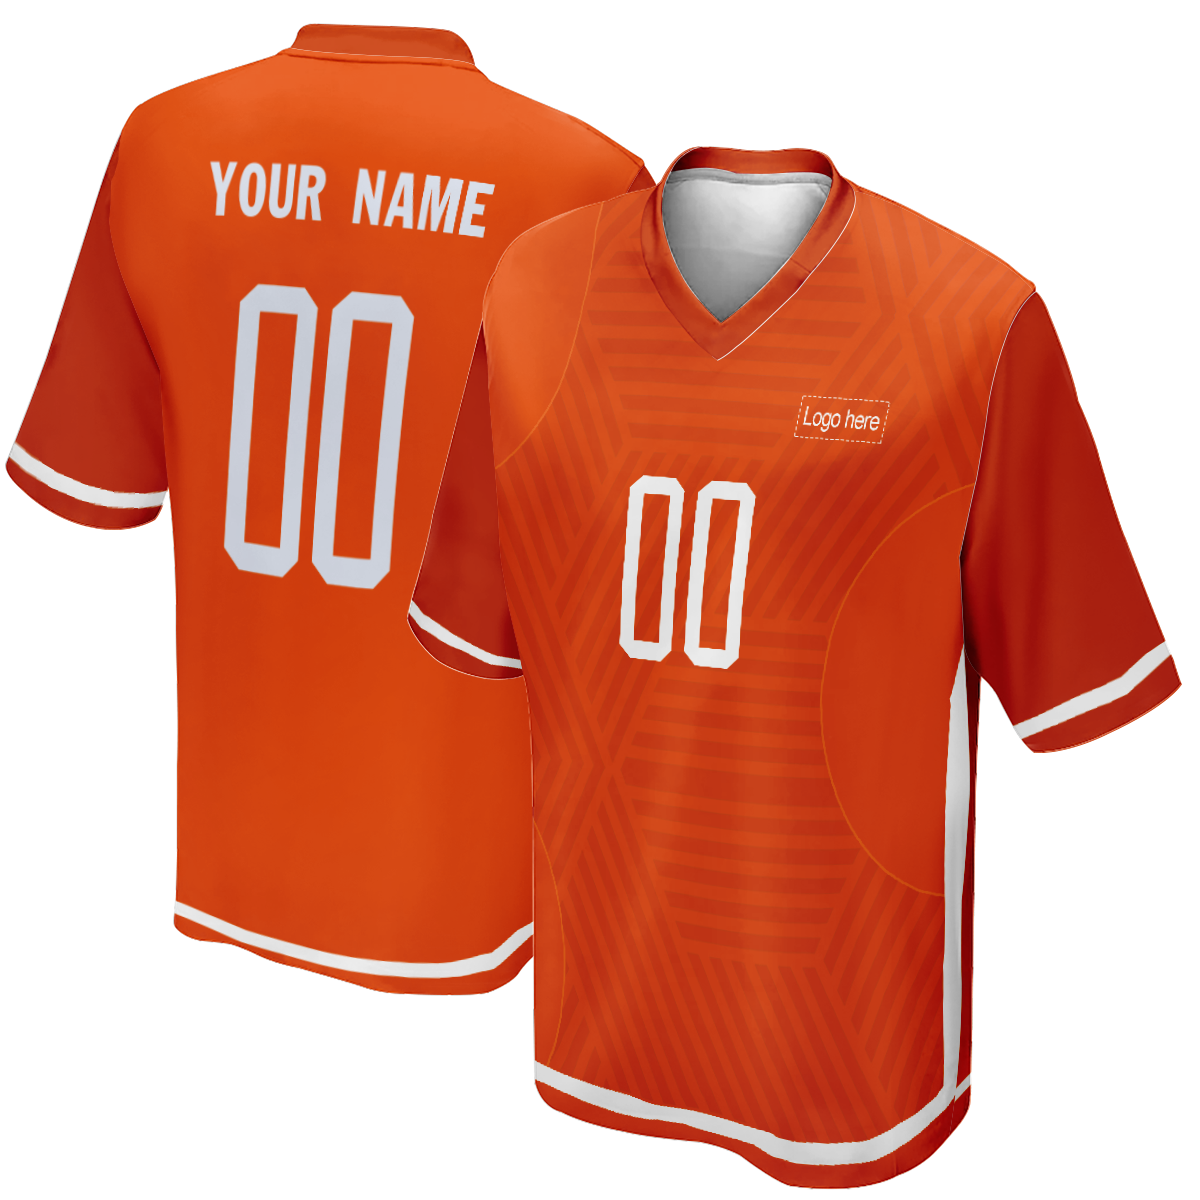 Men's Authentic Netherlands World Cup Custom Soccer Jersey With Picture